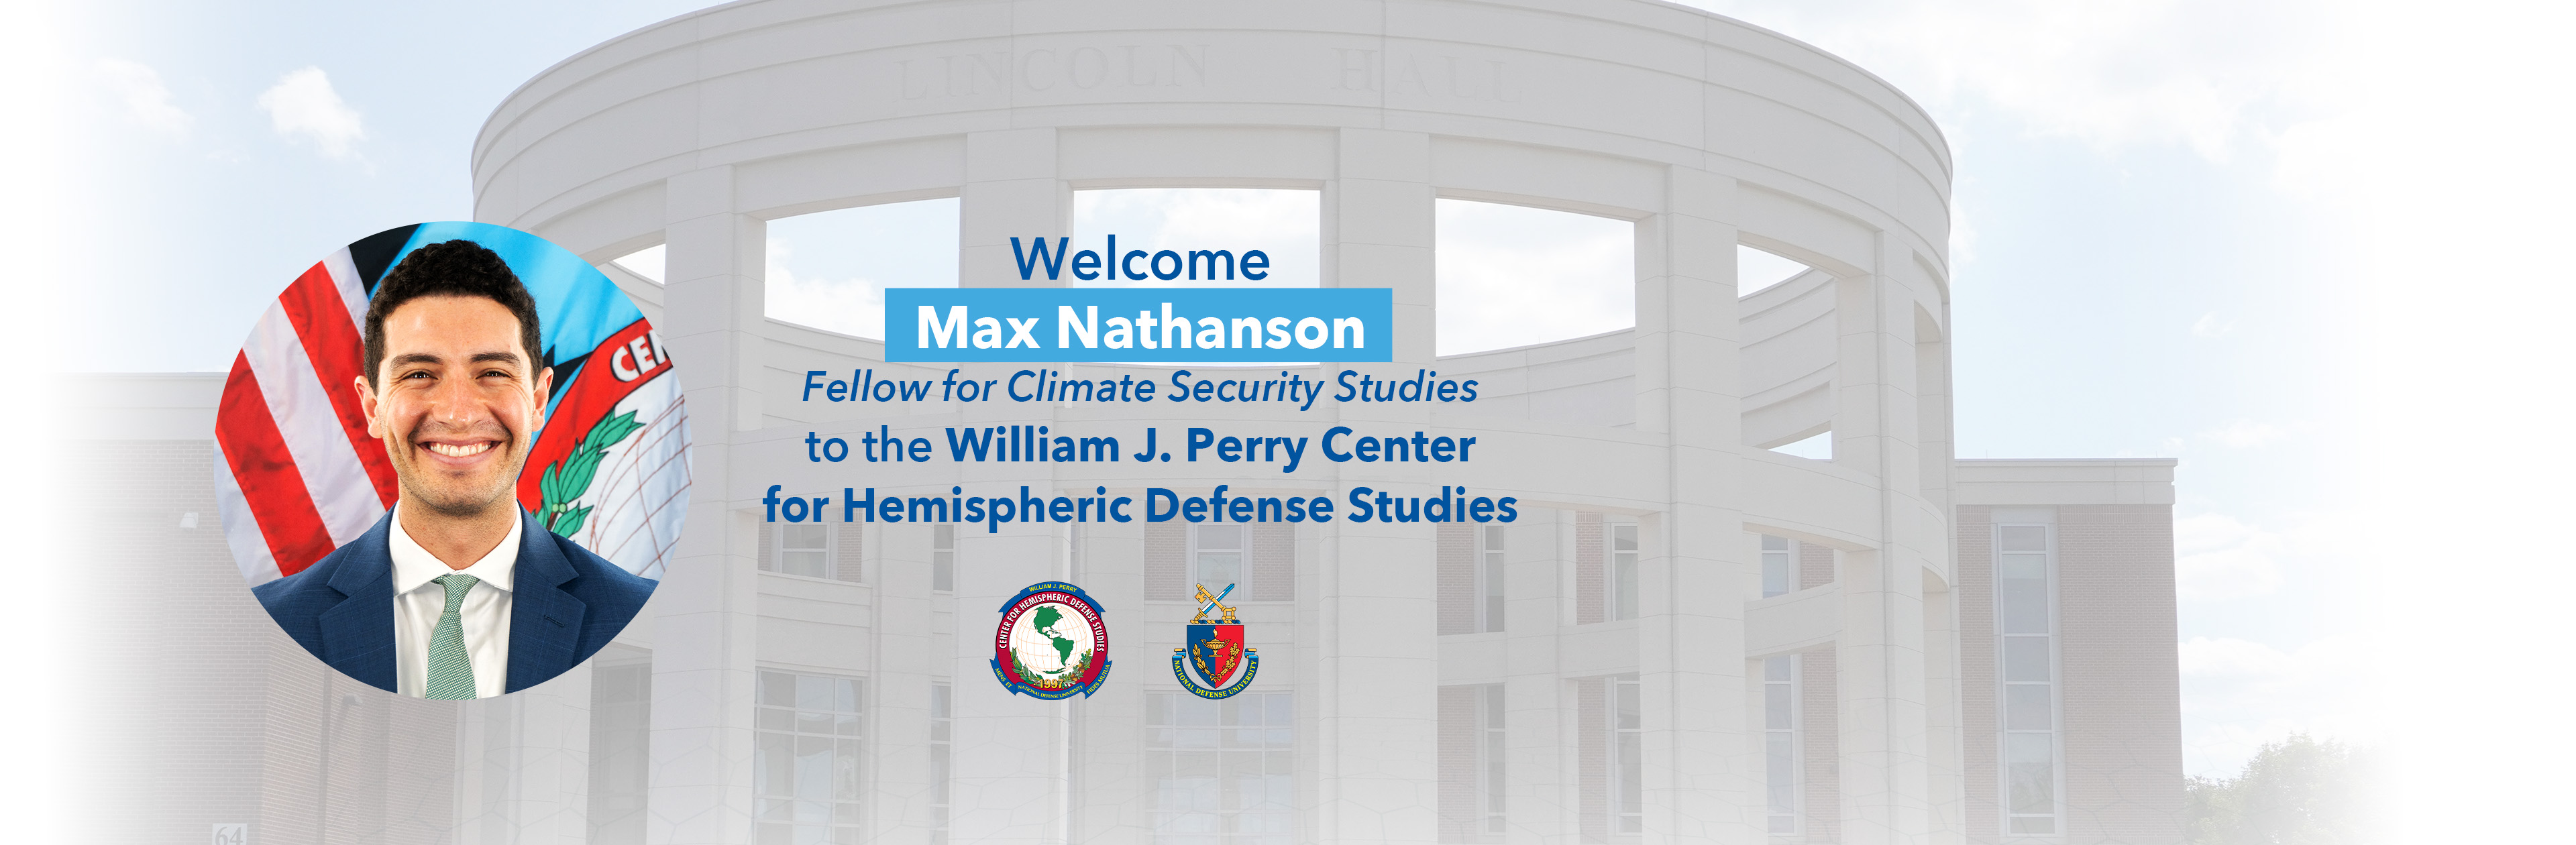 WJPC Welcomes Max Nathanson